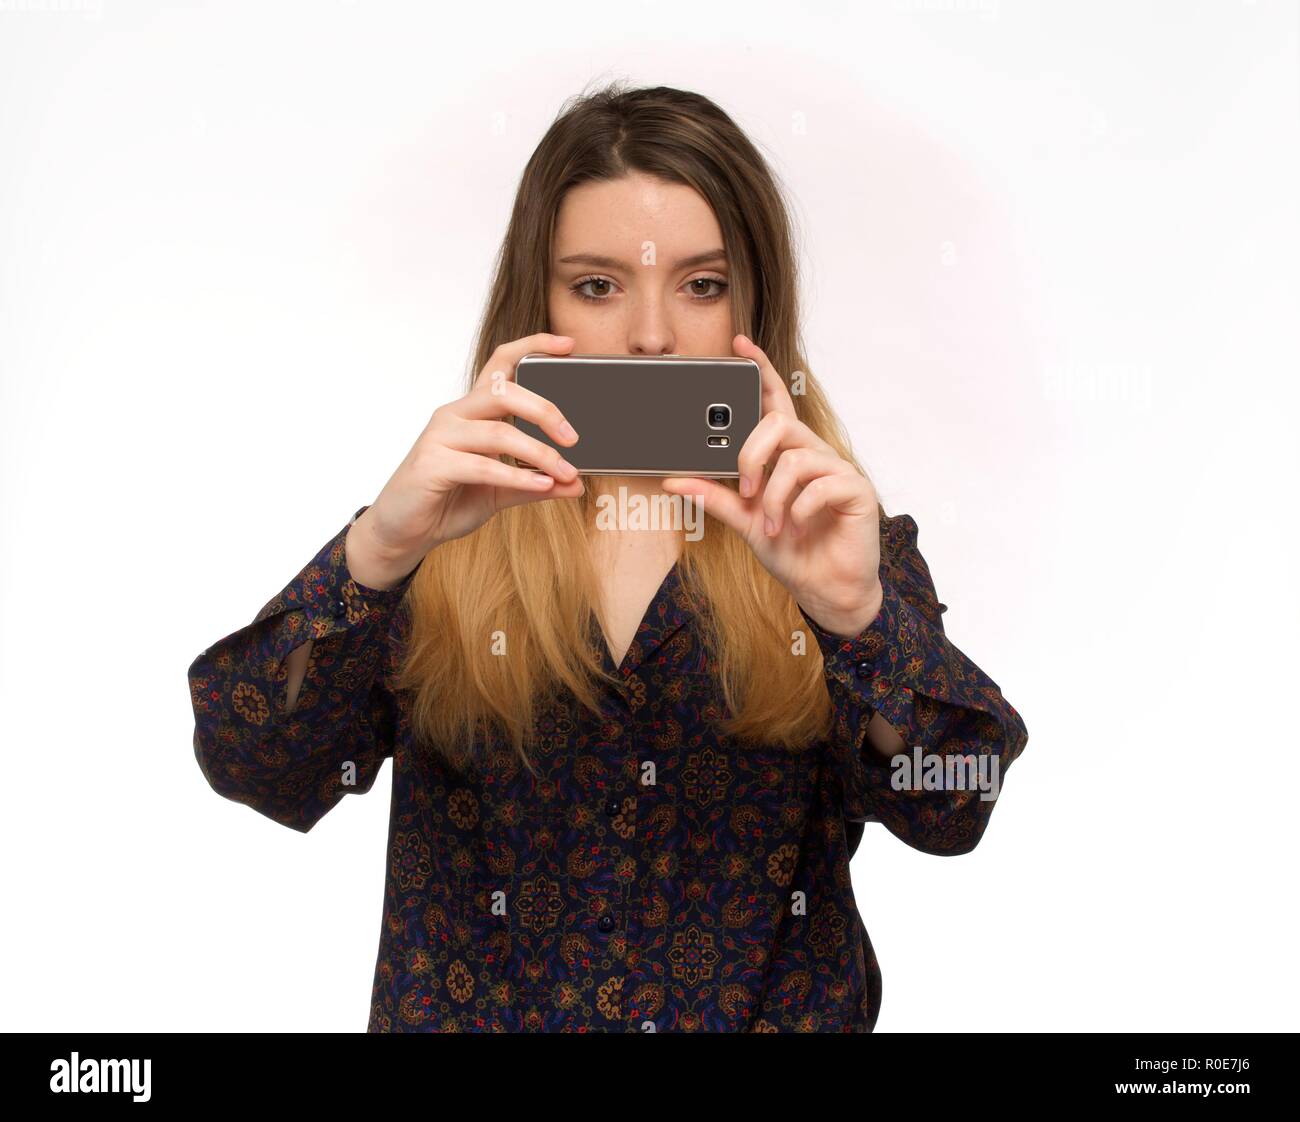 Young woman taking photo with smartphone against white background. Stock Photo